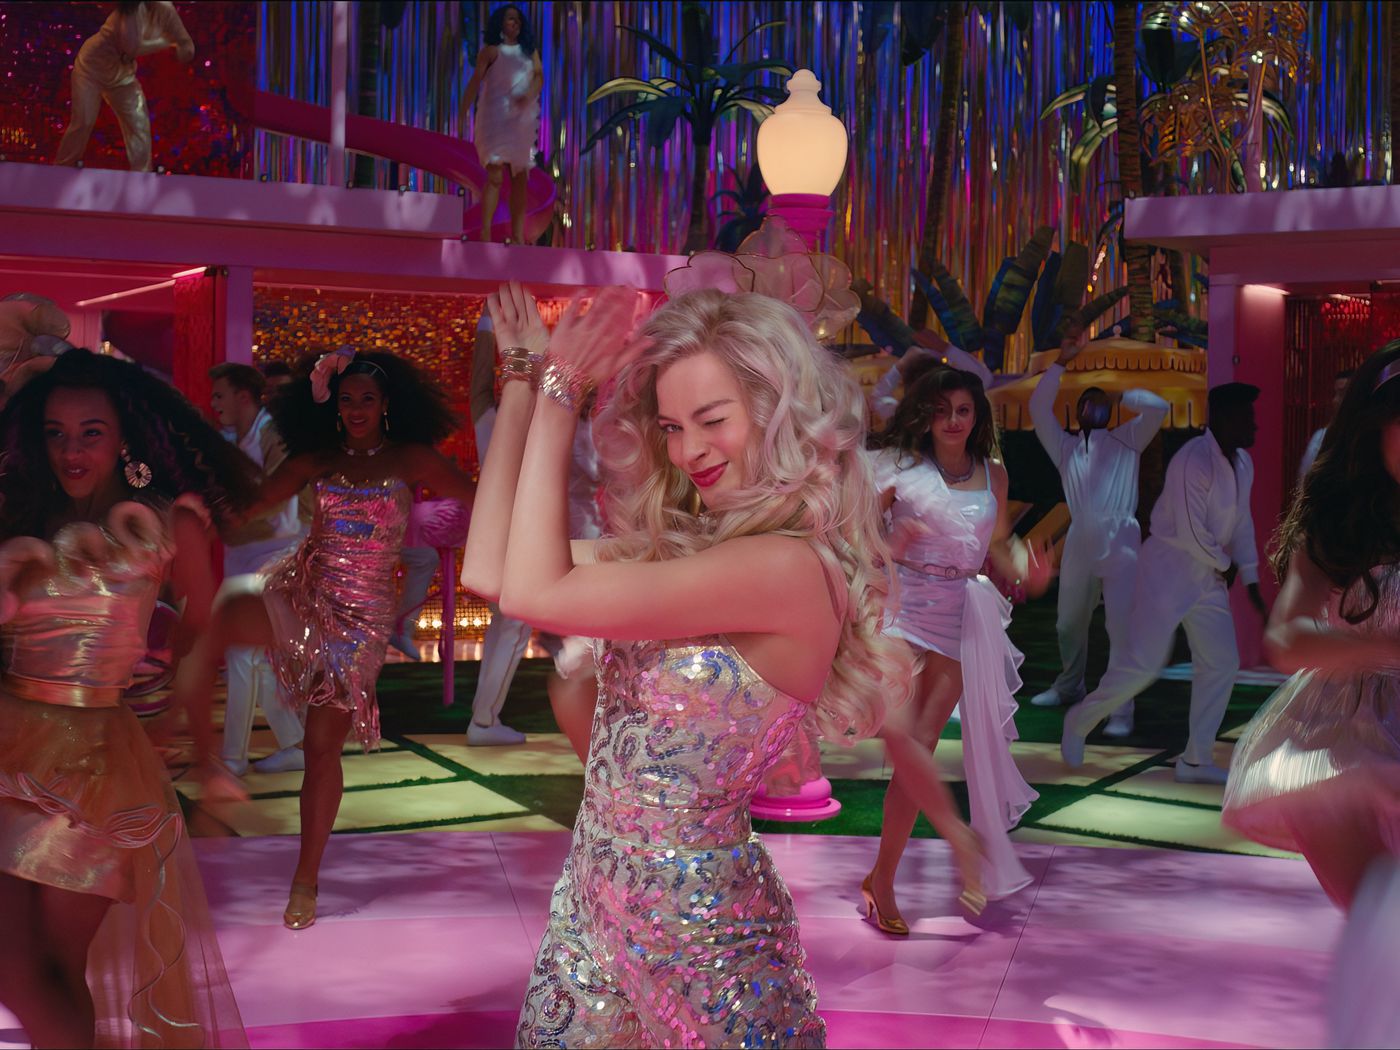 Margot Robbie as Barbie, clapping and dancing in an elaborate musical sequence in Barbie.